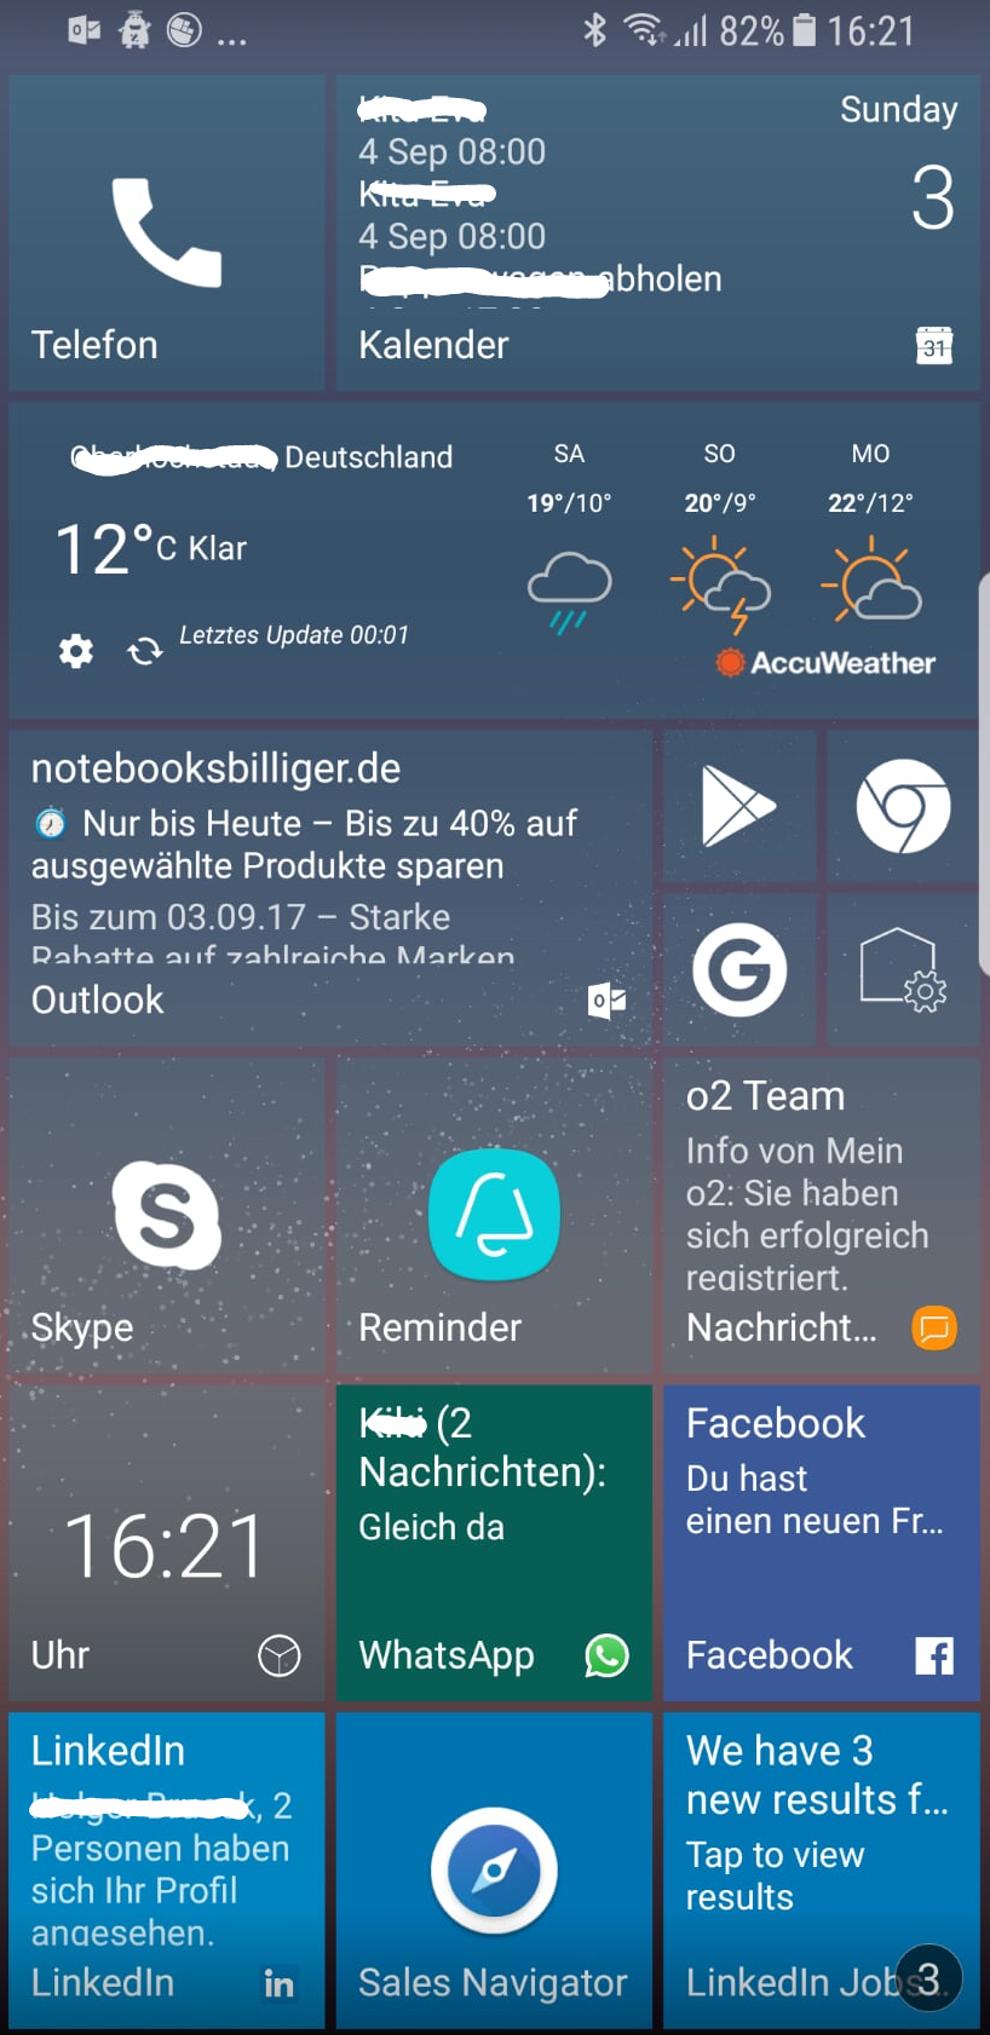 android launcher 10 live tiles